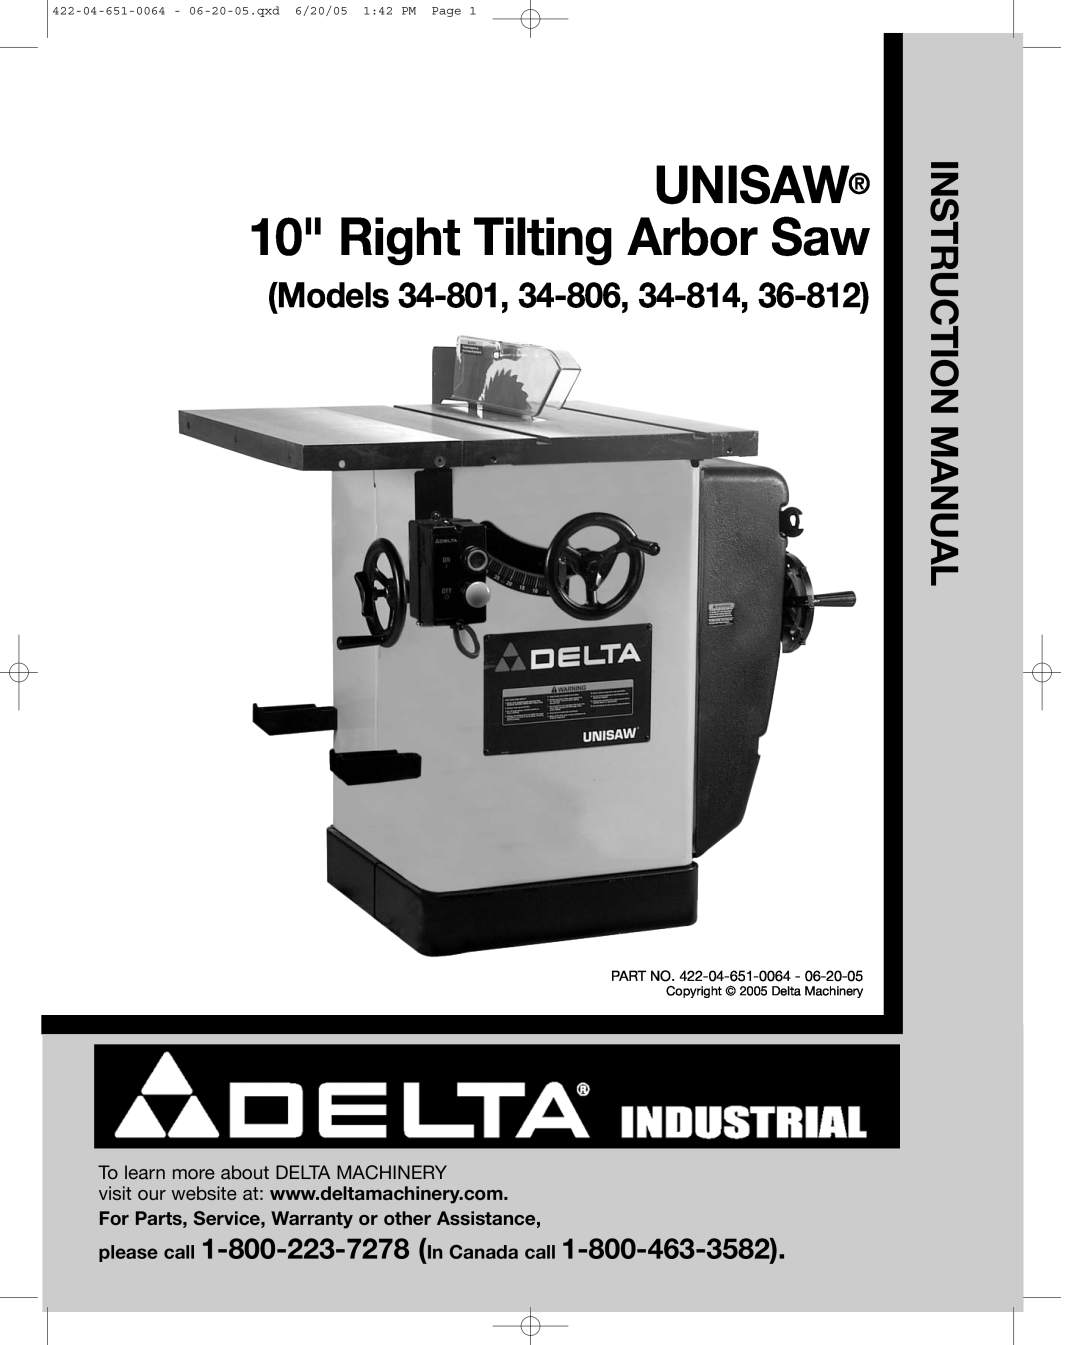 Delta 34-806, 34-814 instruction manual please call 1-800-223-7278 In Canada call, UNISAW 10 Right Tilting Arbor Saw 